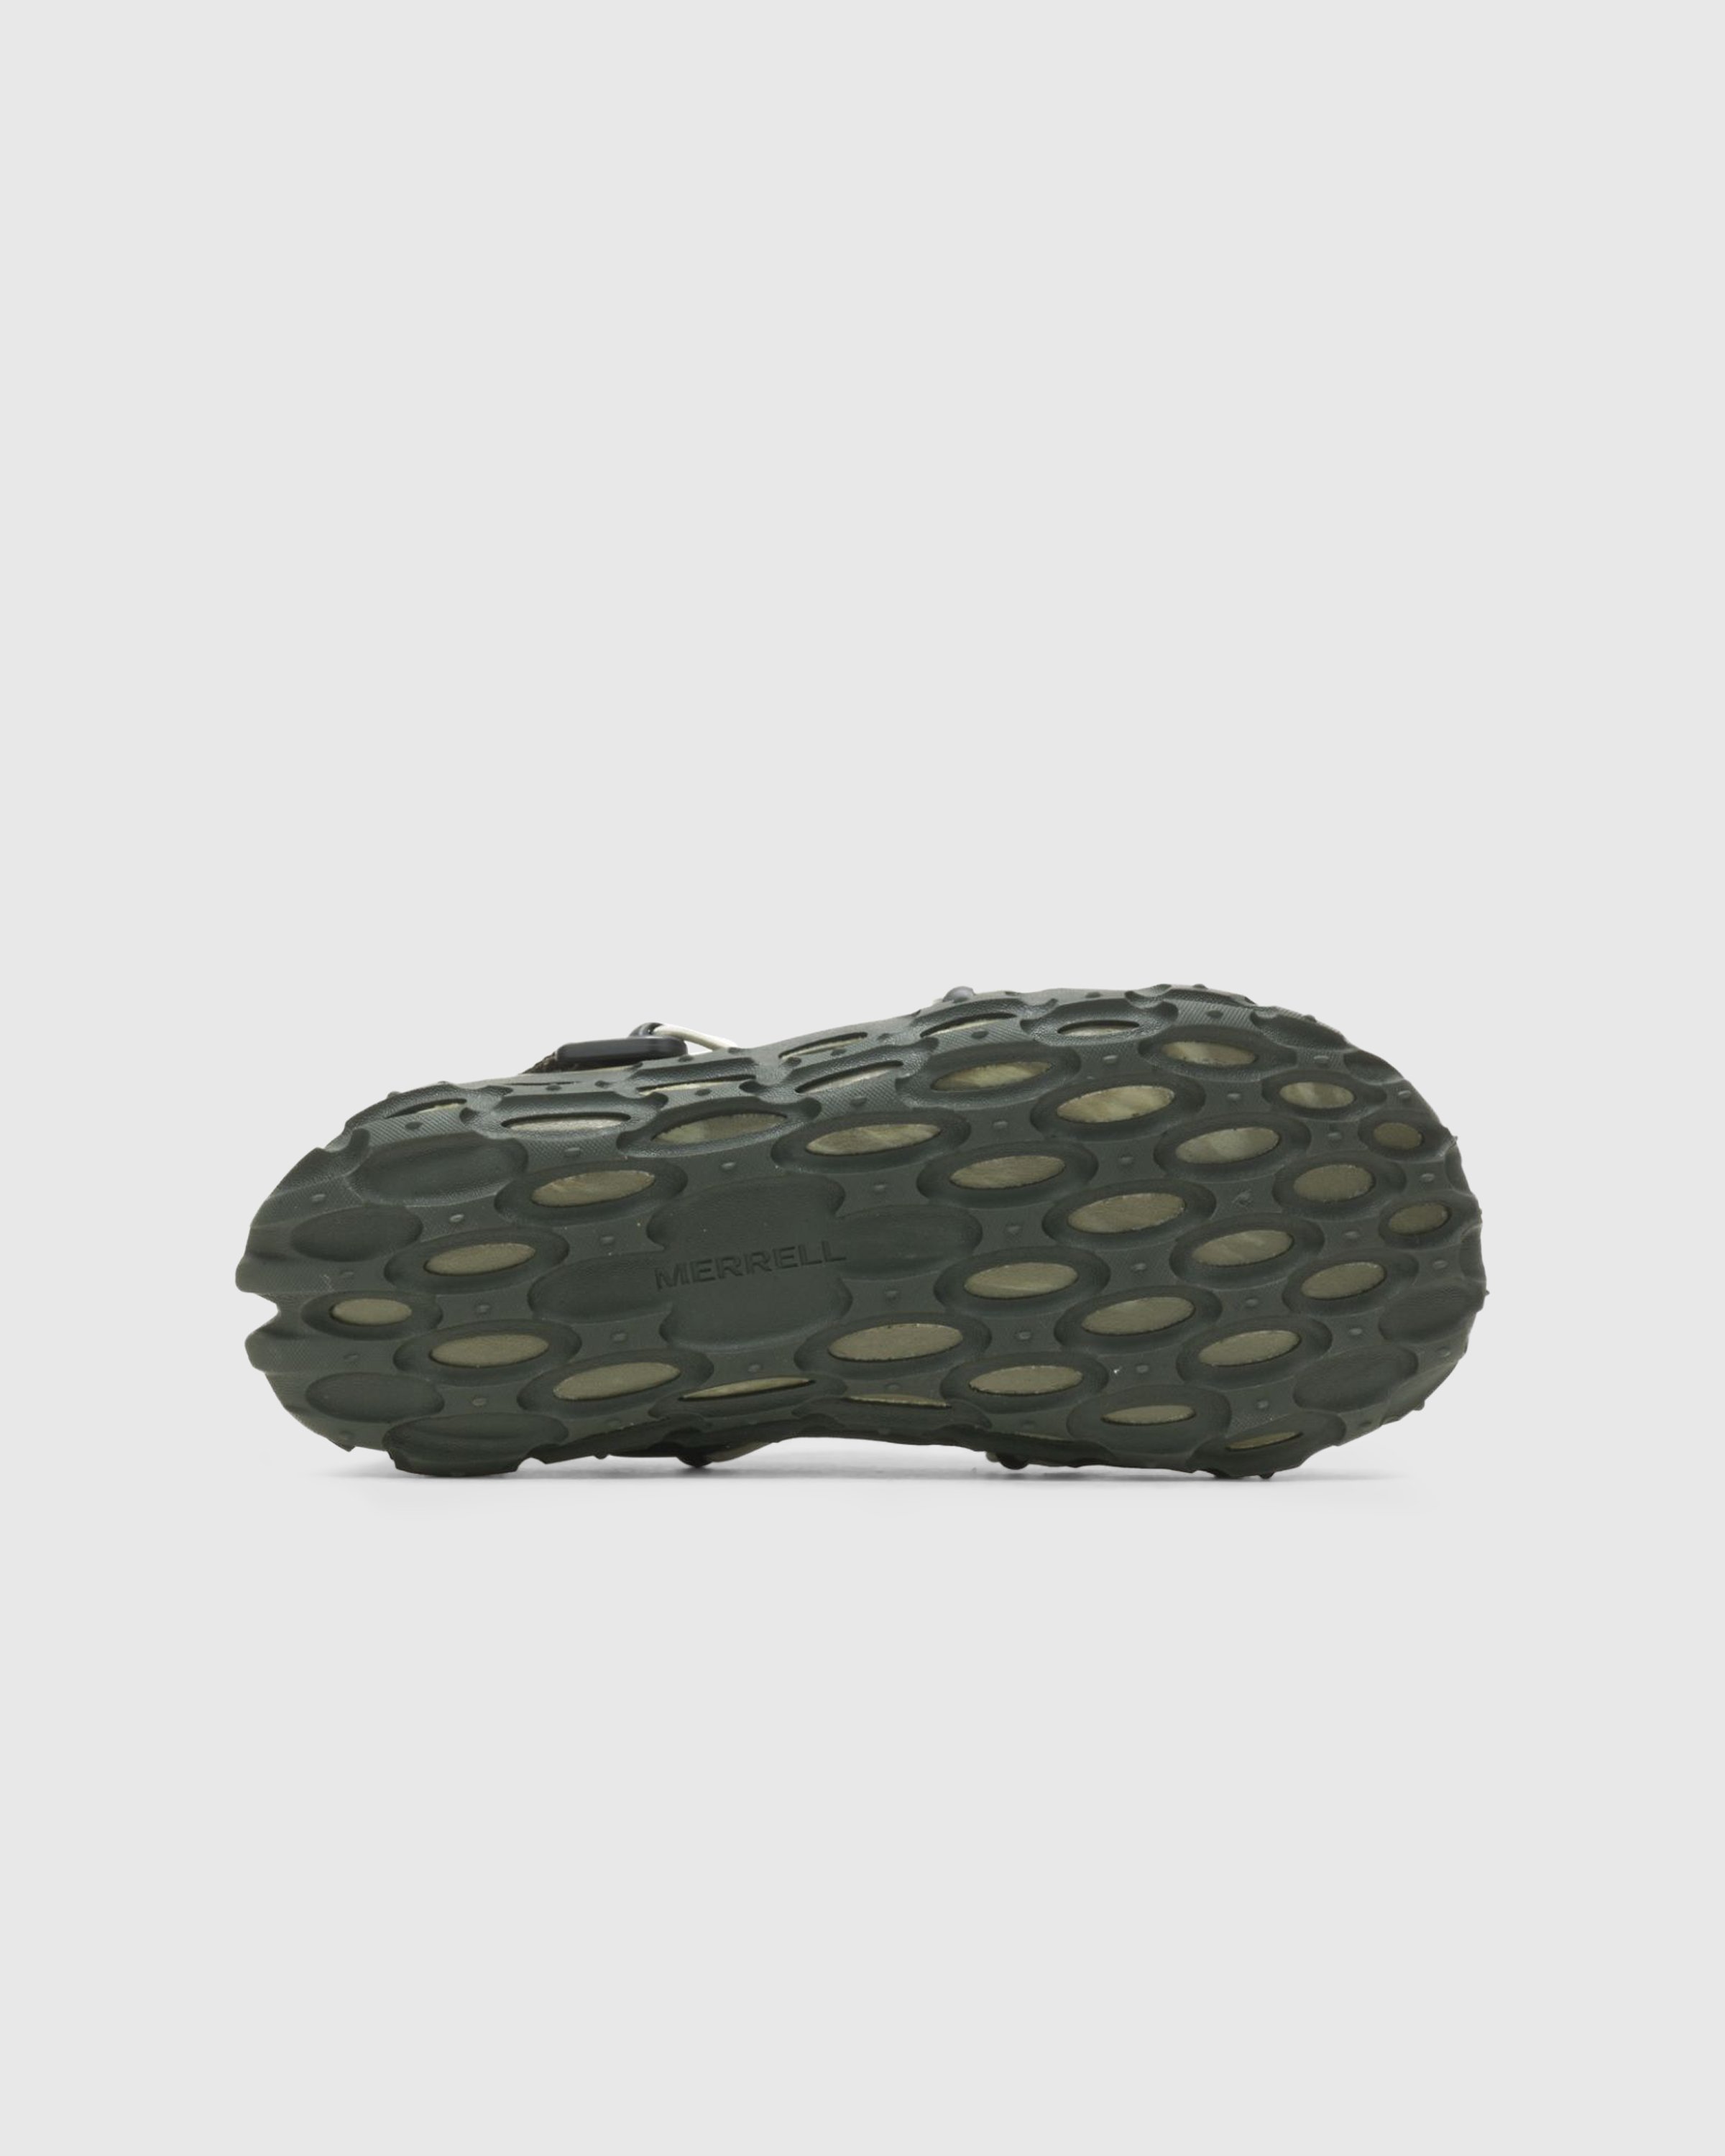 Merrell - Hydro Moc AT Cage 1TRL Olive - Footwear - Green - Image 5